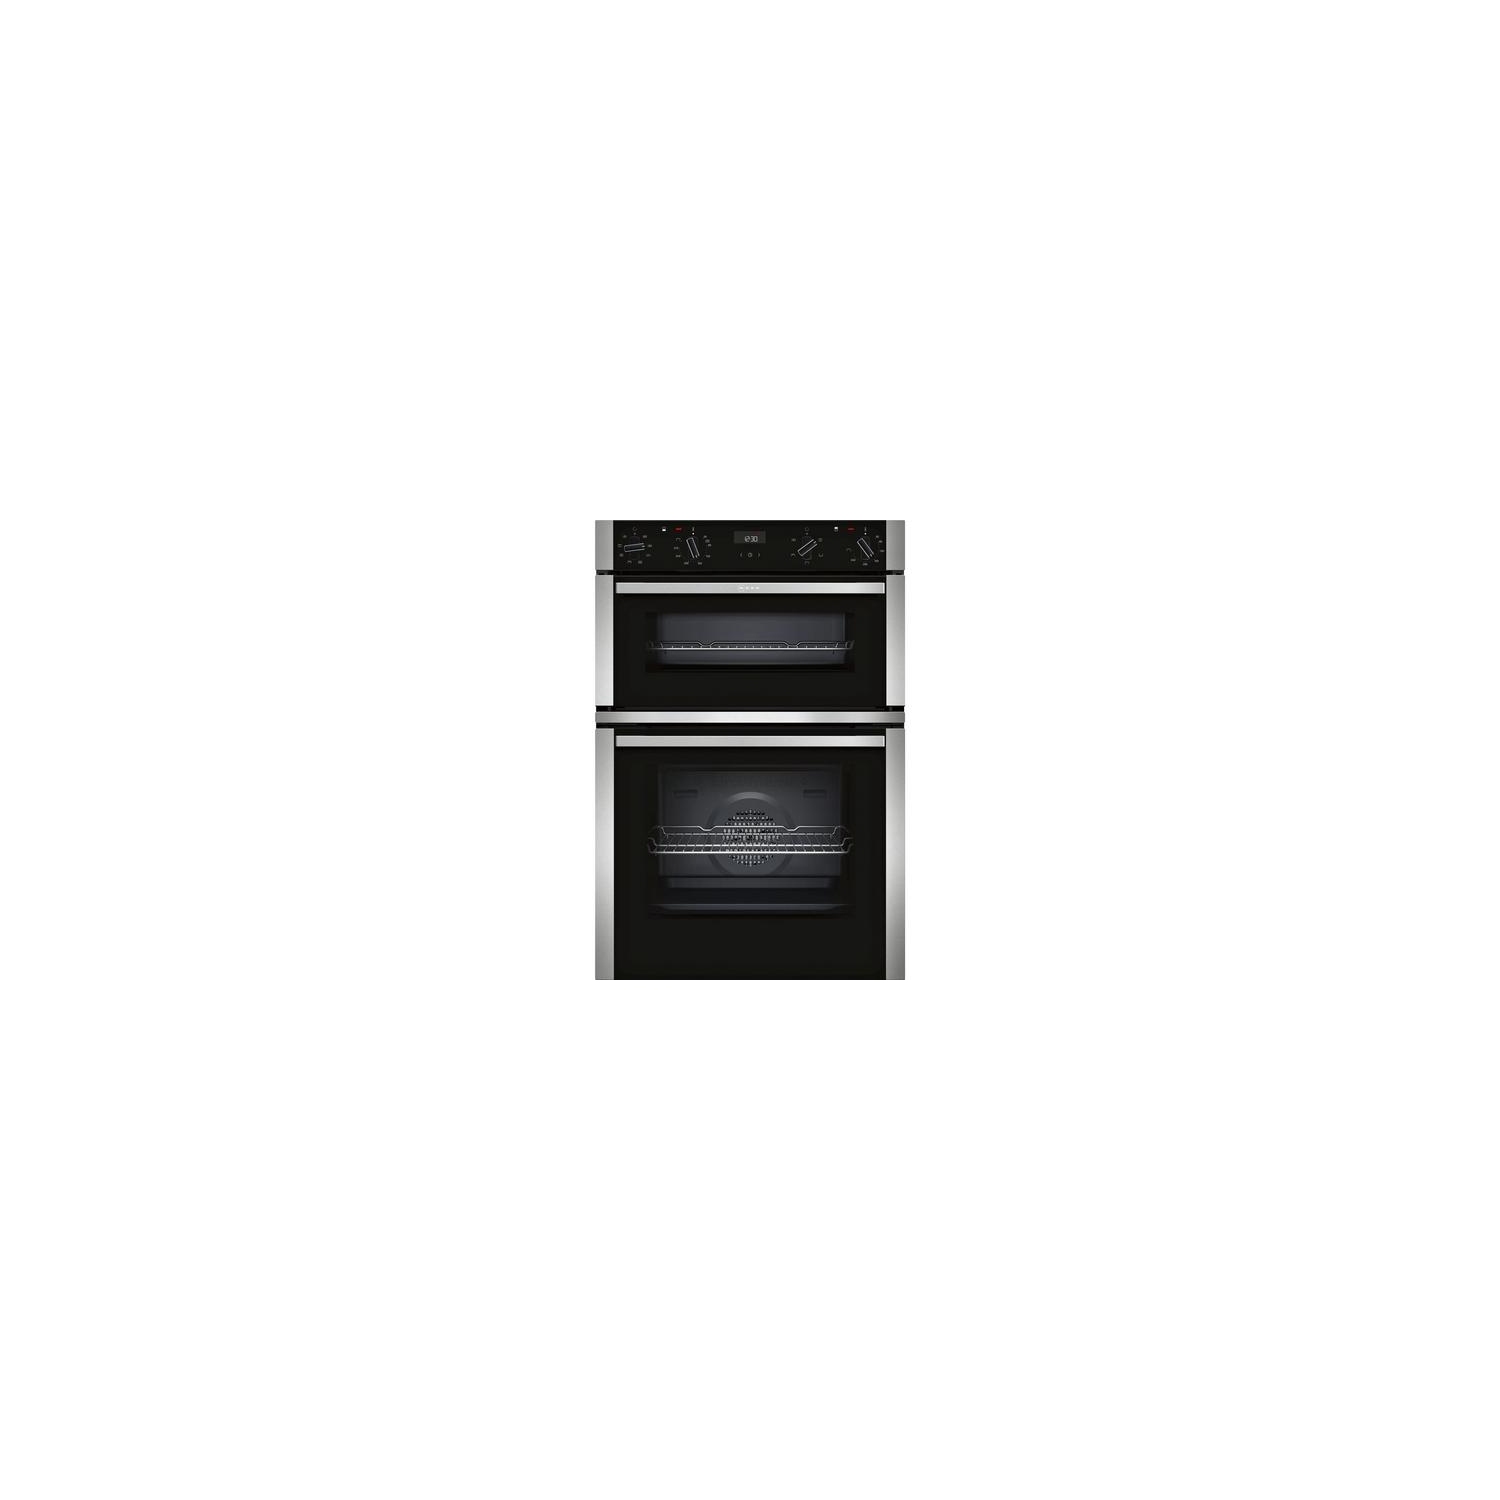 Neff U1ACE2HN0B 59.4cm Built In Electric CircoTherm Double Oven - BLACK/STEEL - 0